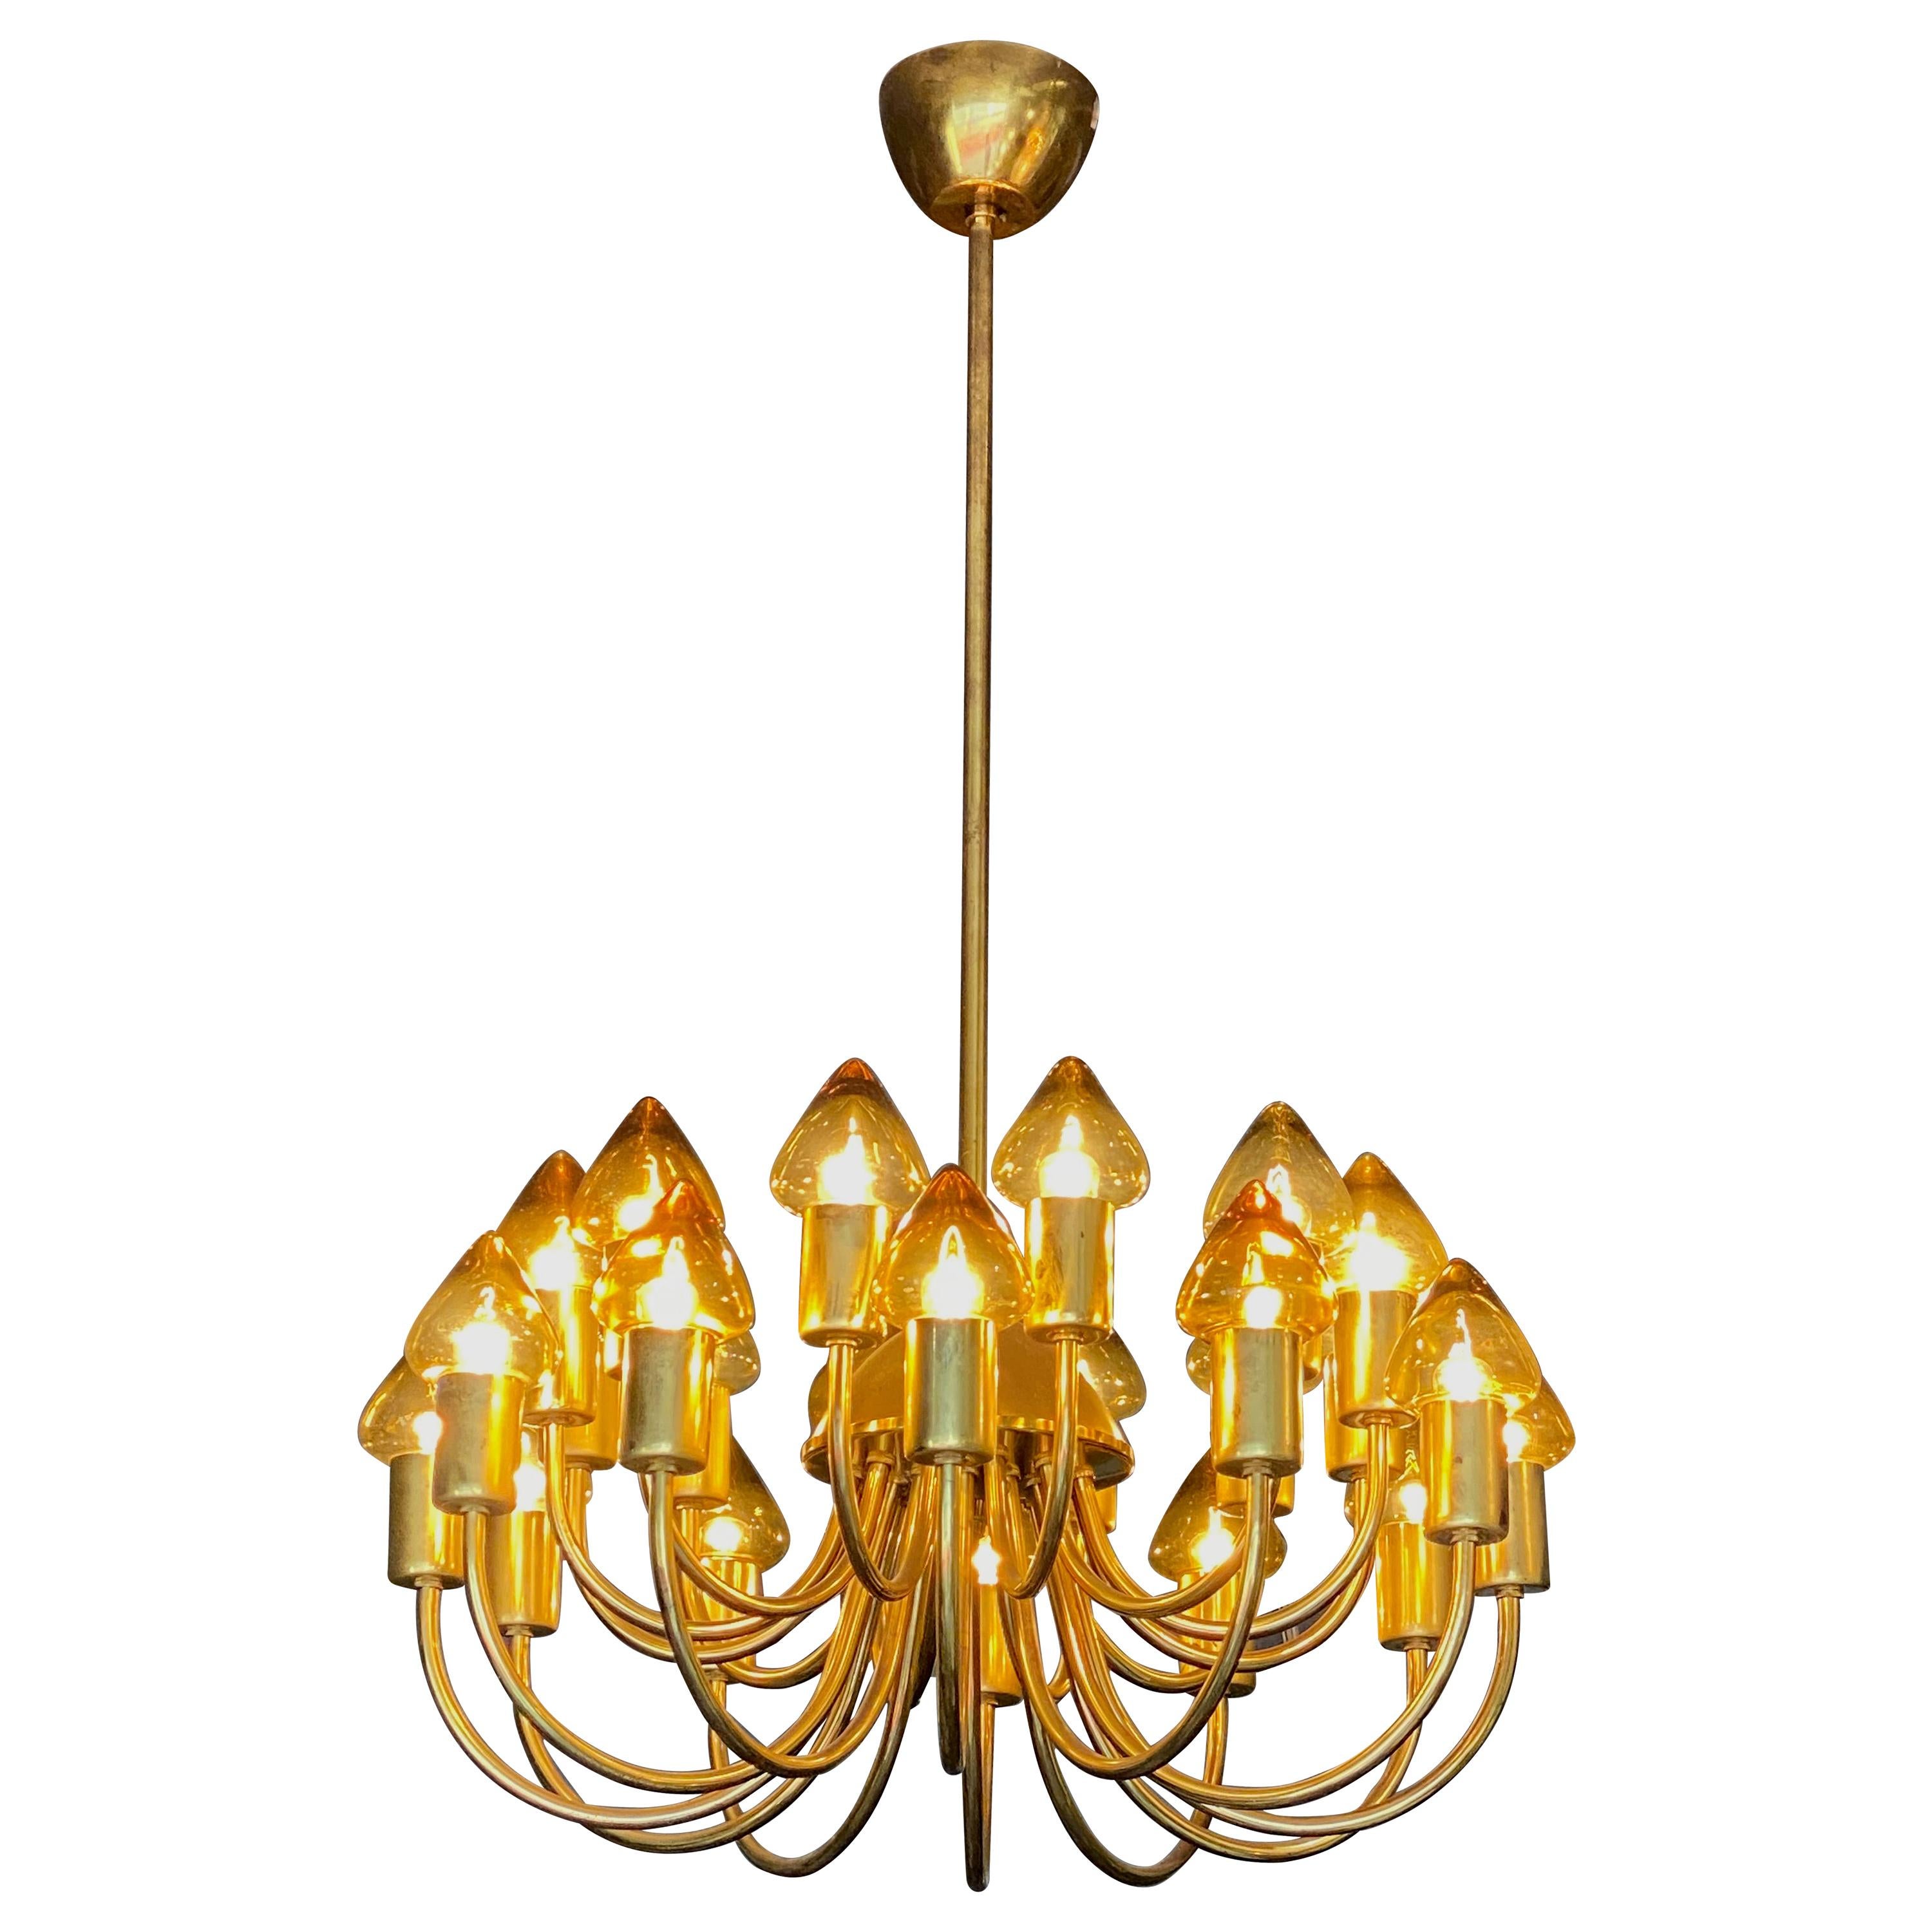  Arne Jacobsen : Pair of Scale Brass Chandelier  For Sale